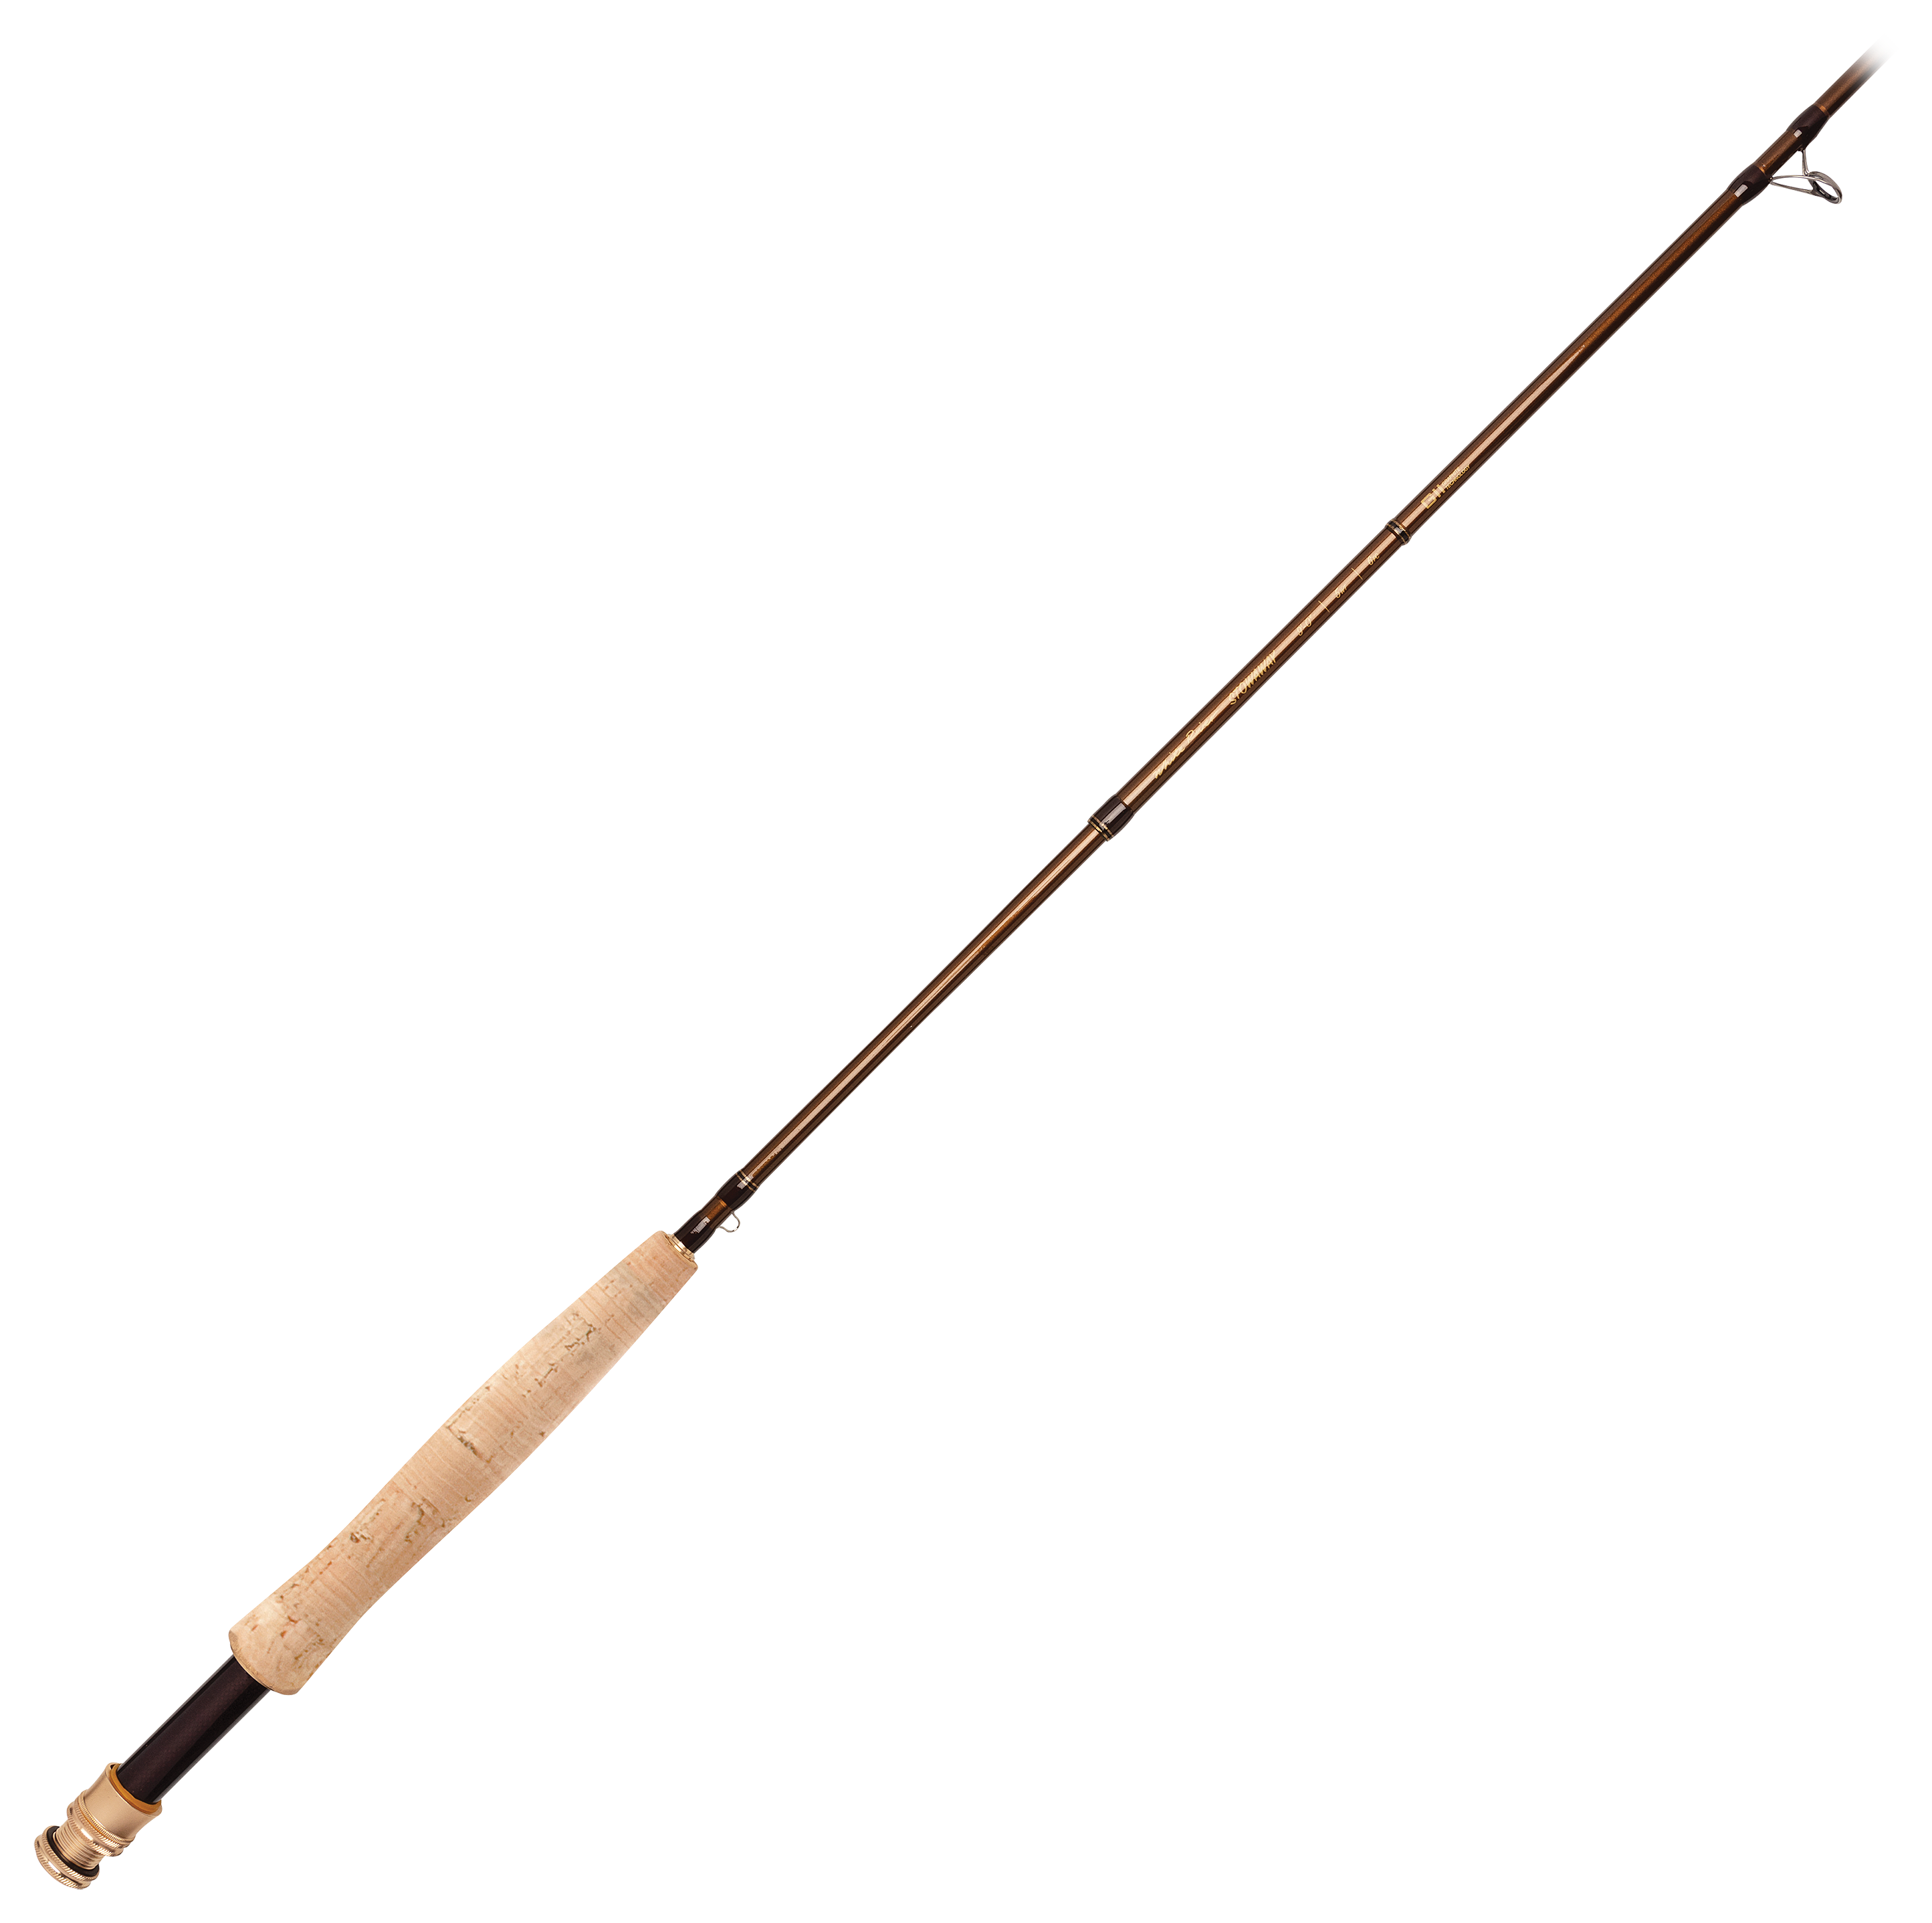 White River Fly Shop Stowaway Fly Rod - WRST908-6